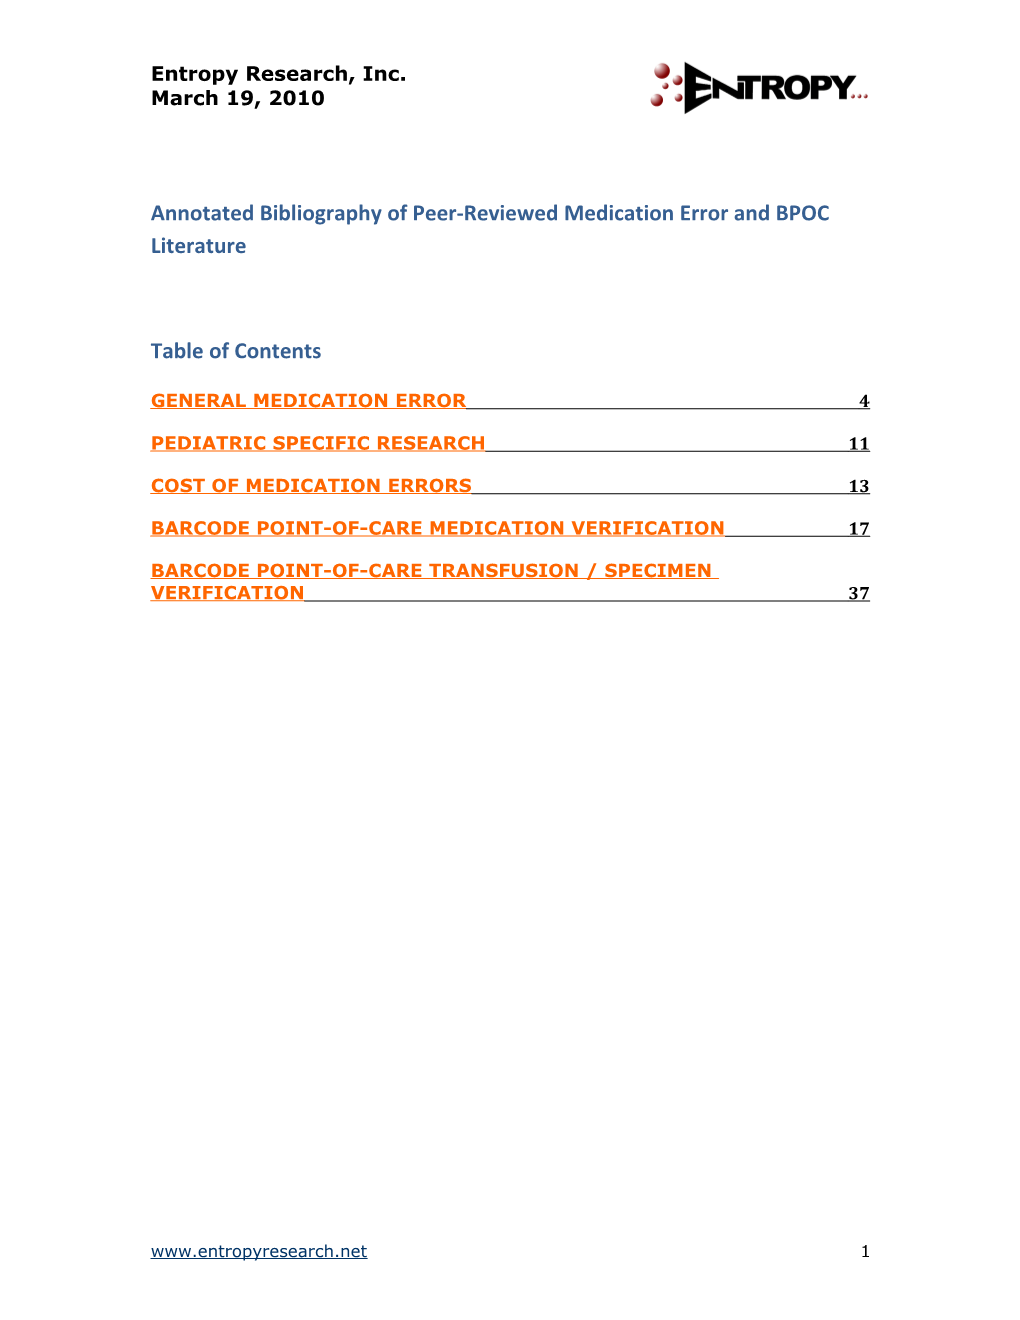 Annotated Bibliography of Peer-Reviewed Medication Error and BPOC Literature s1